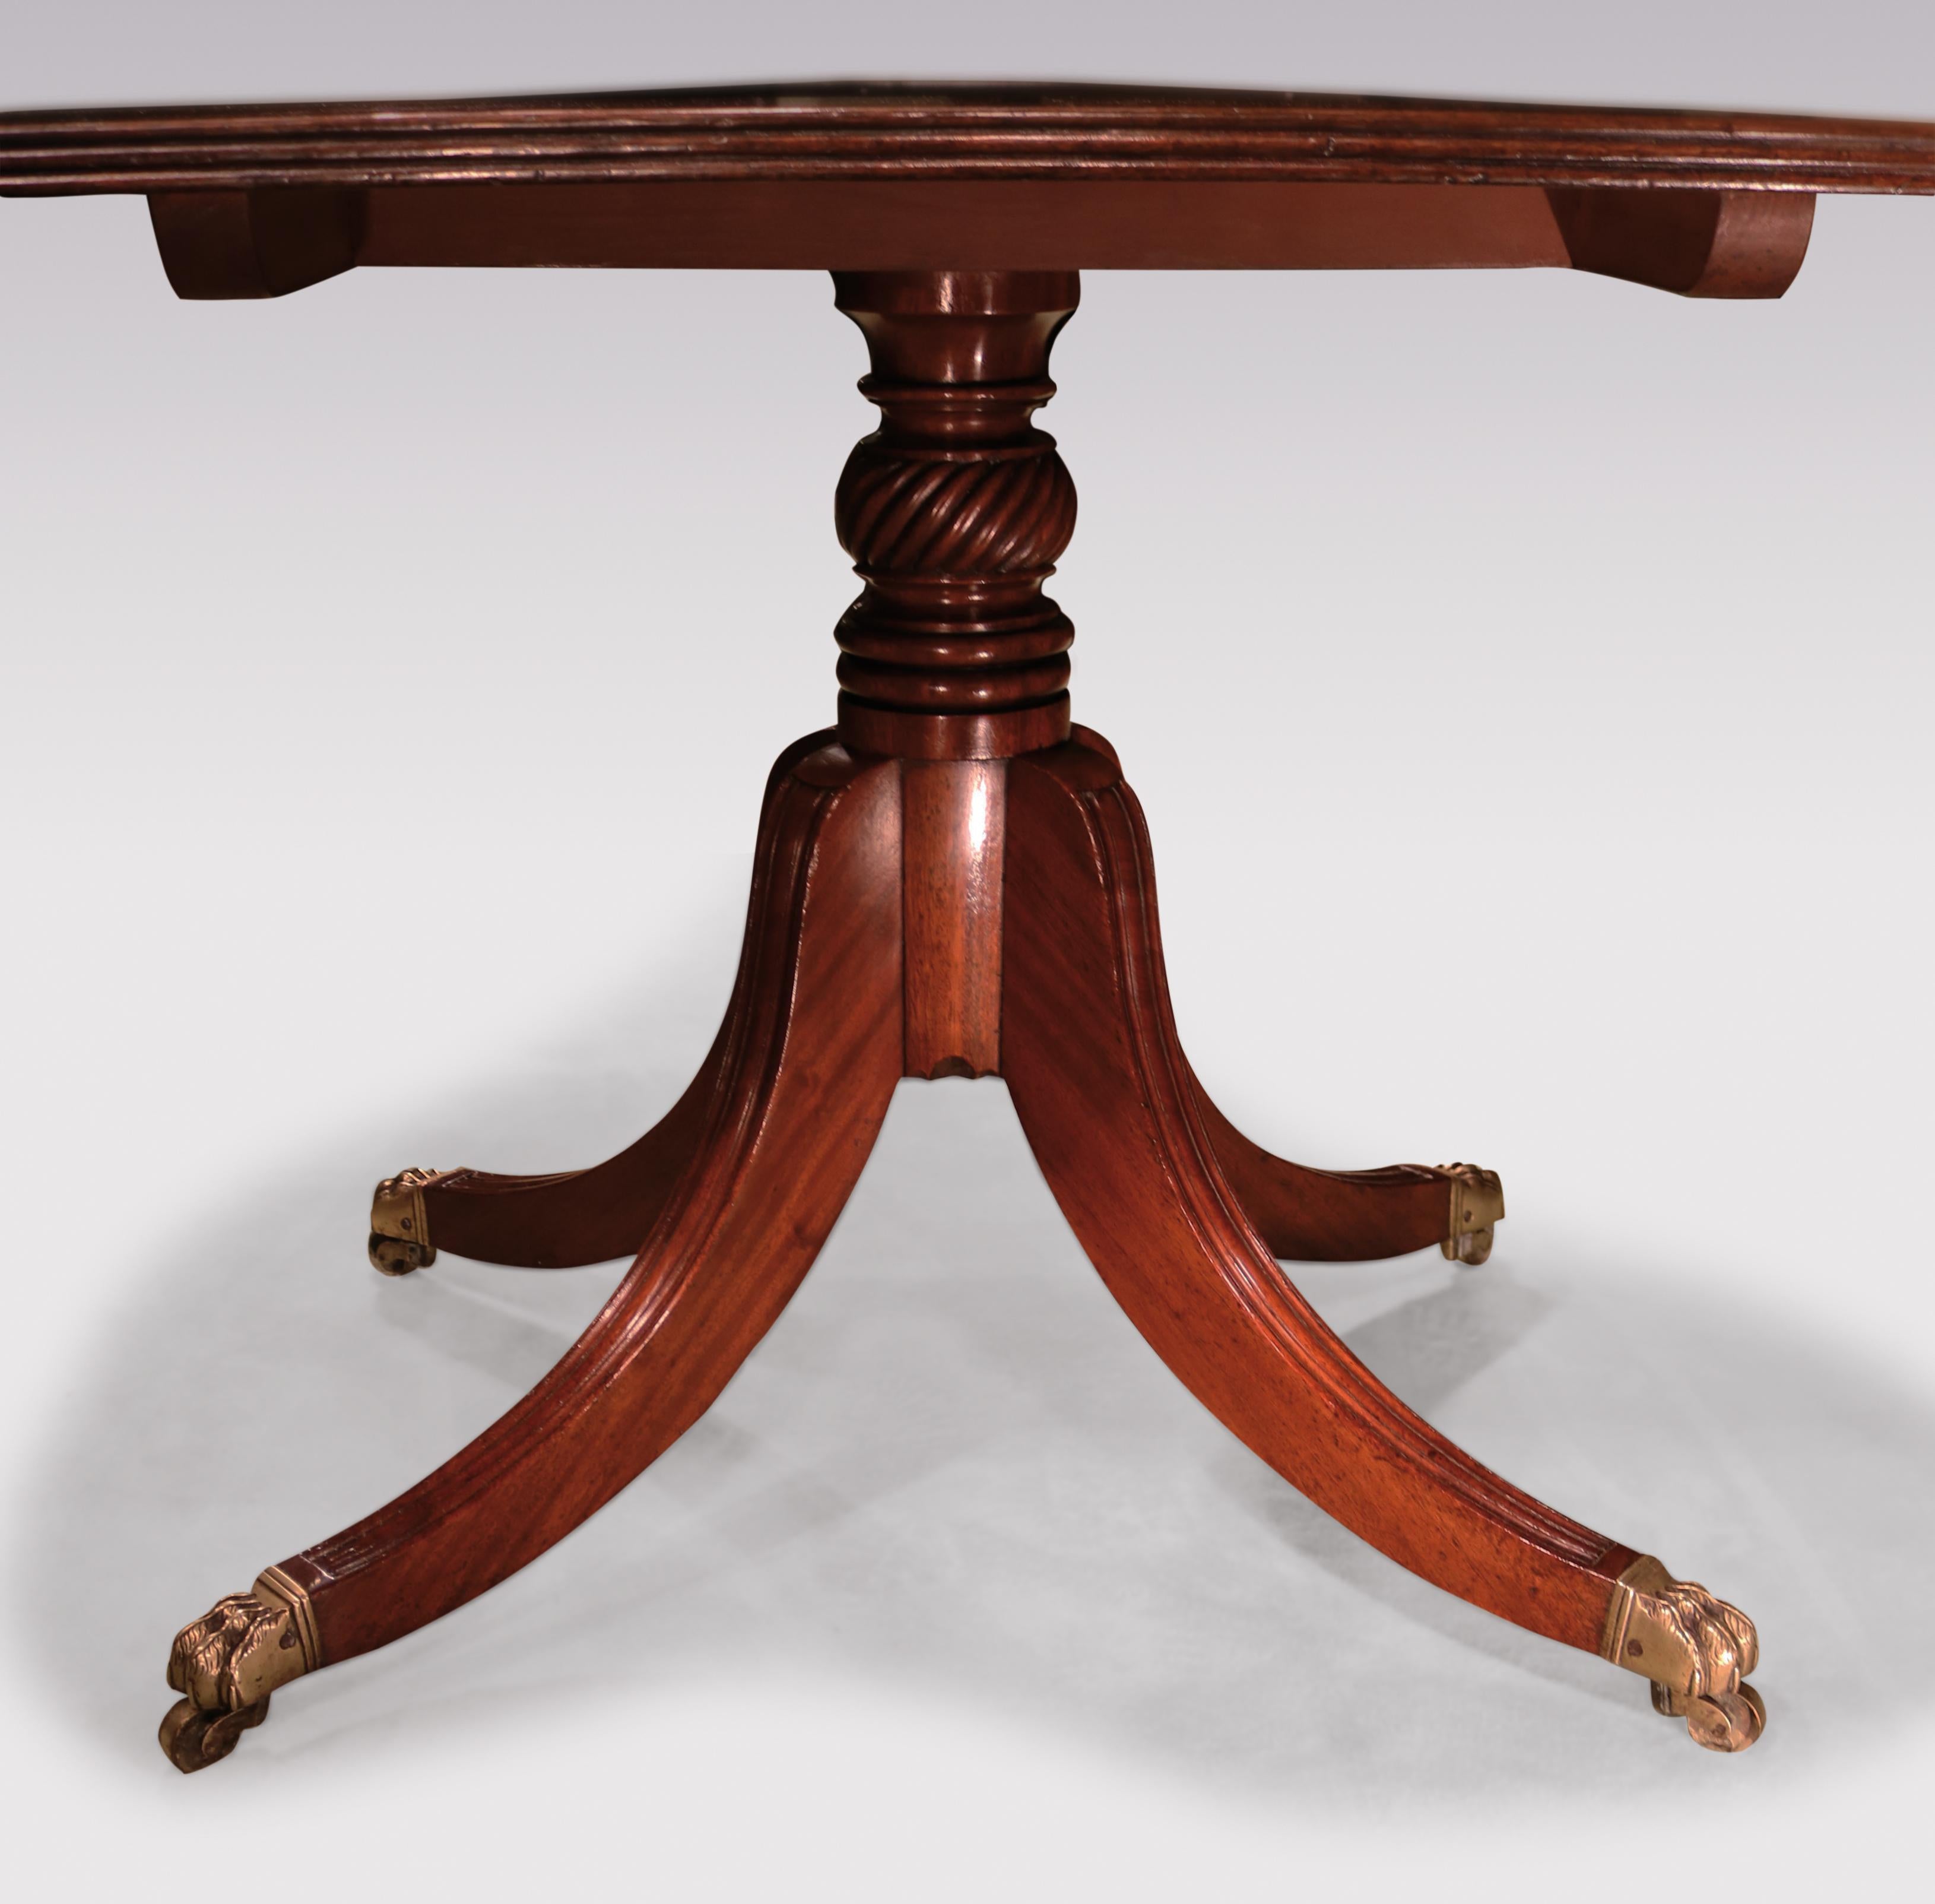 Regency Period Mahogany Three Pillar Dining Table In Good Condition For Sale In London, GB